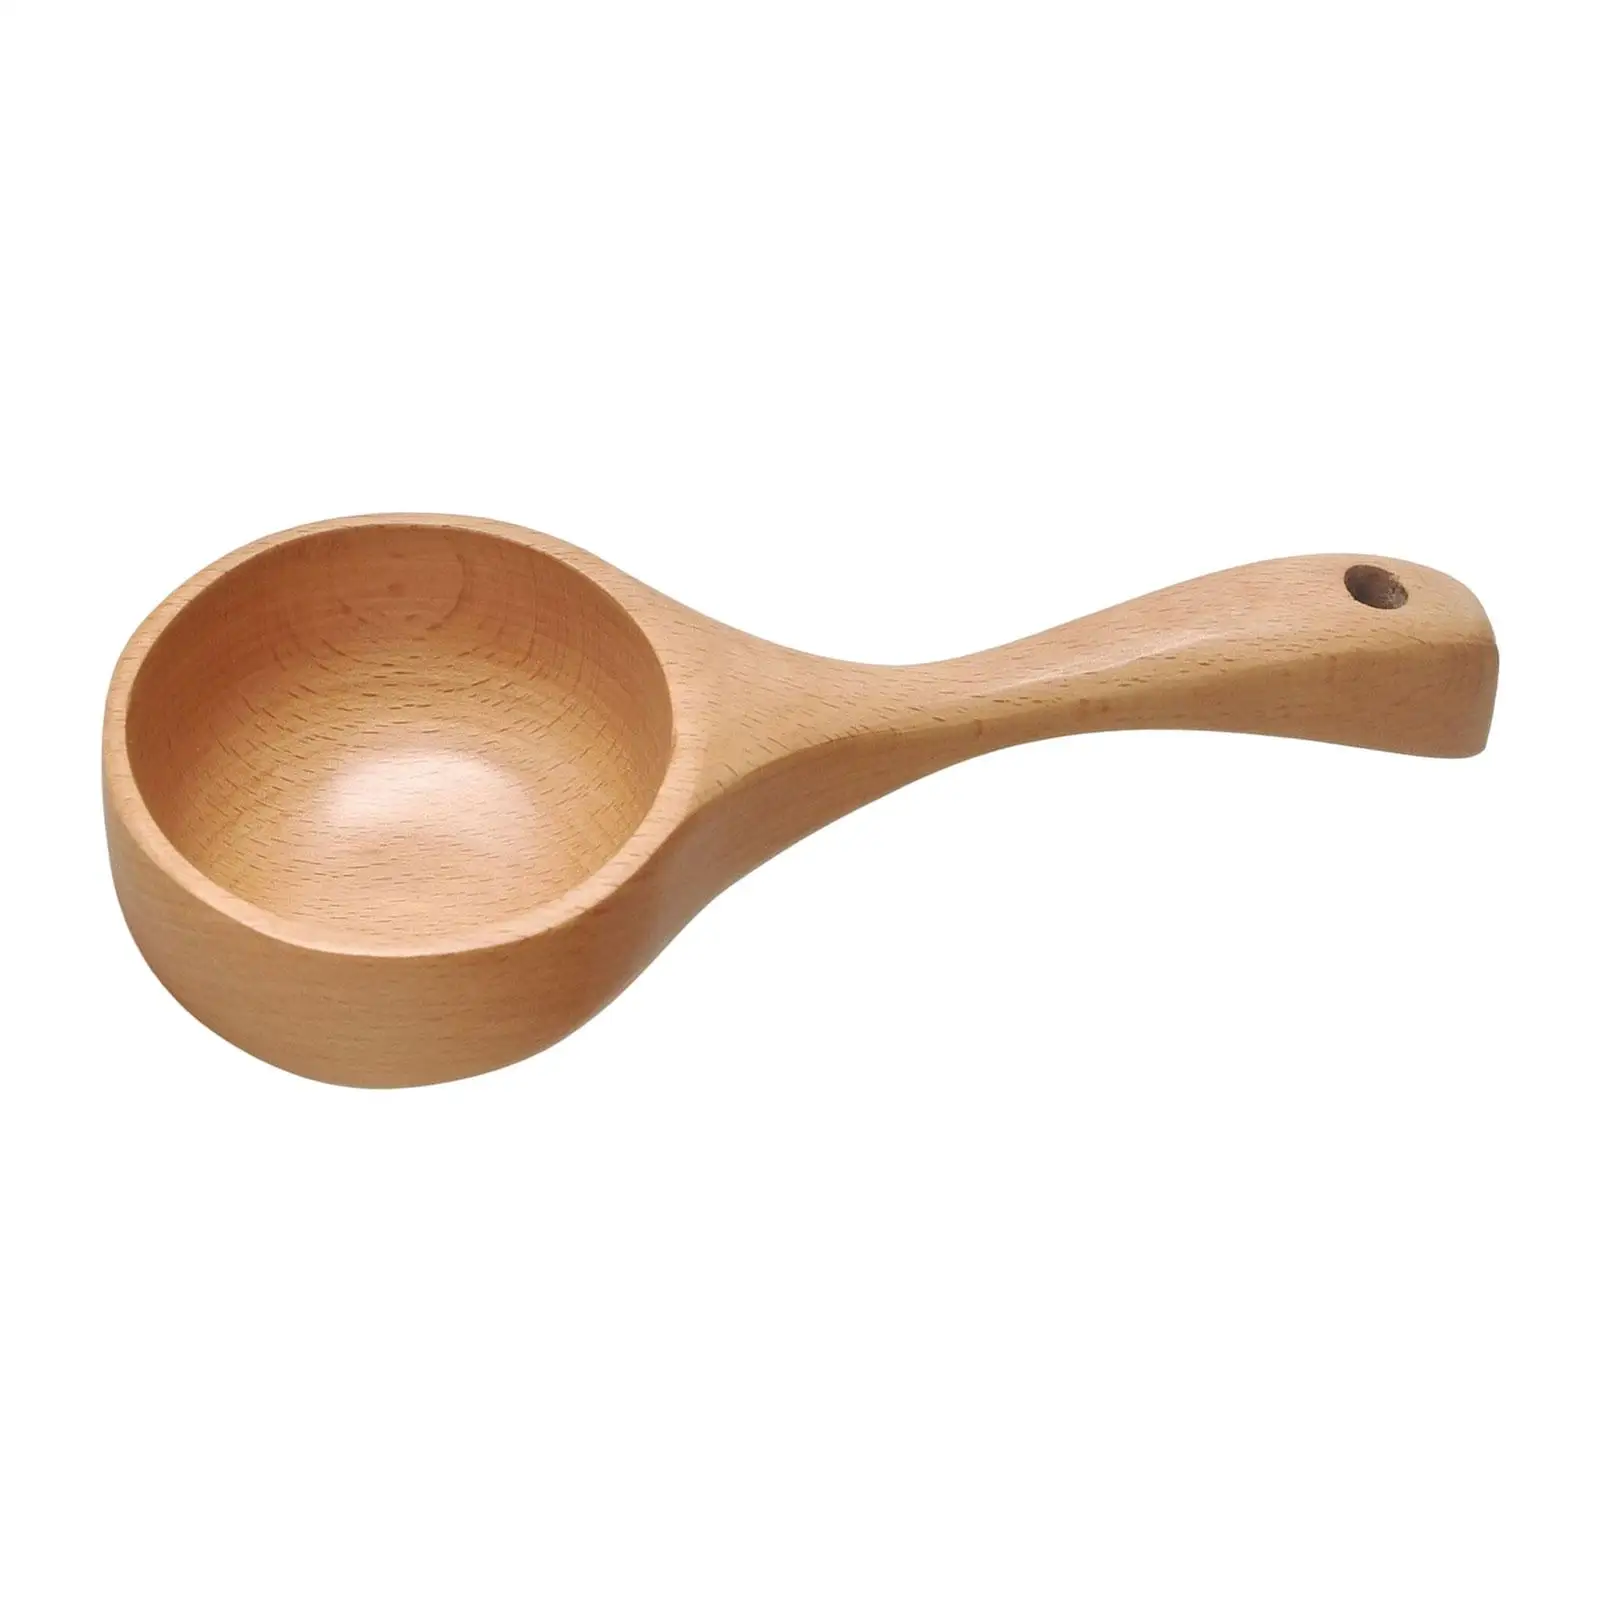 Wooden Ladle Spoon Handmade Kitchen Utensil Serving Soup Tablespoon Water Spoon for Bath Salt Canisters Flour Cooking Porridge